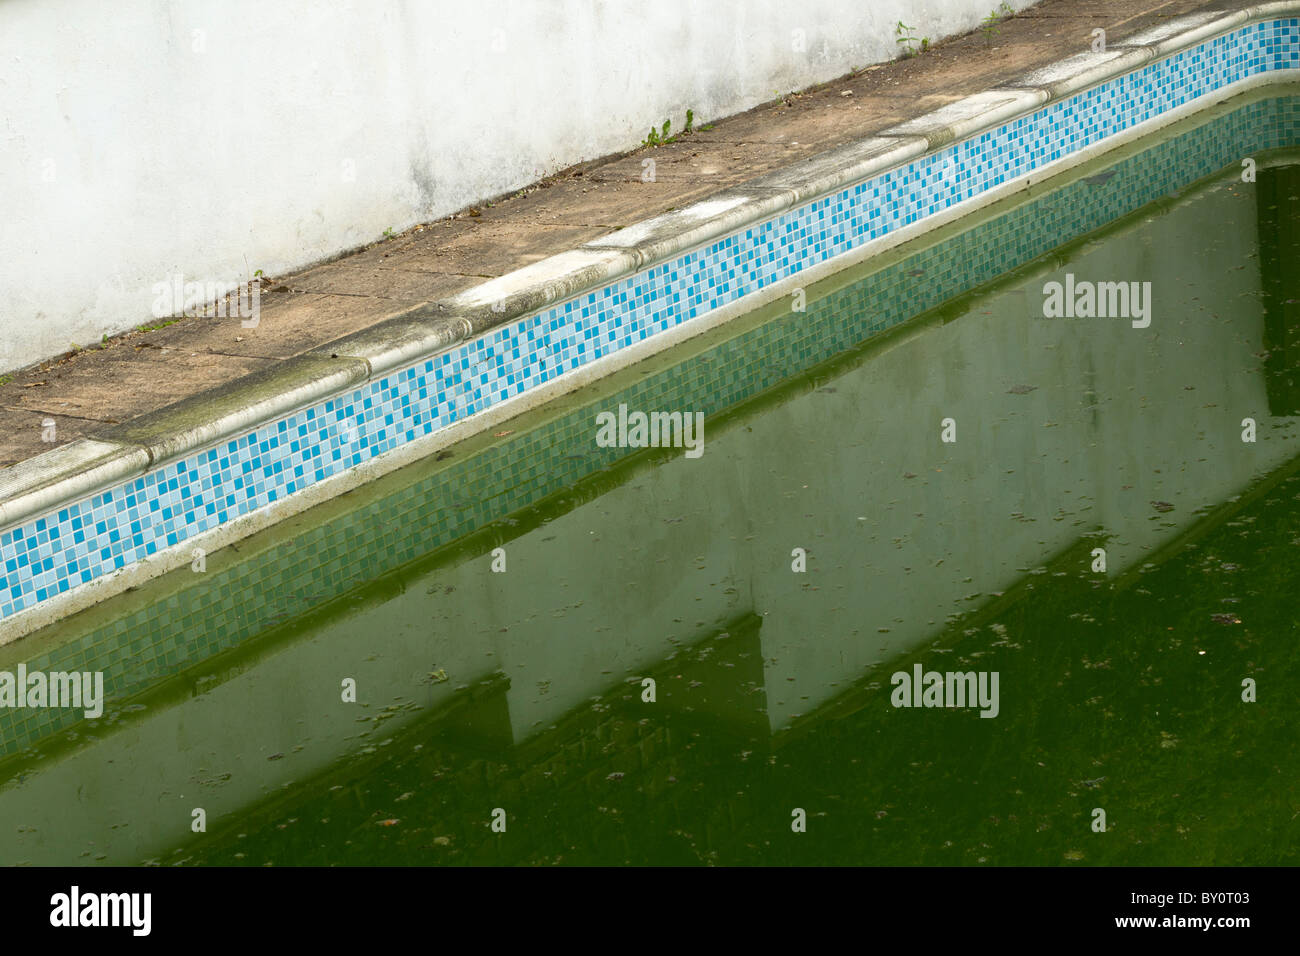 Slimy green swimming pool needs cleaning Stock Photo